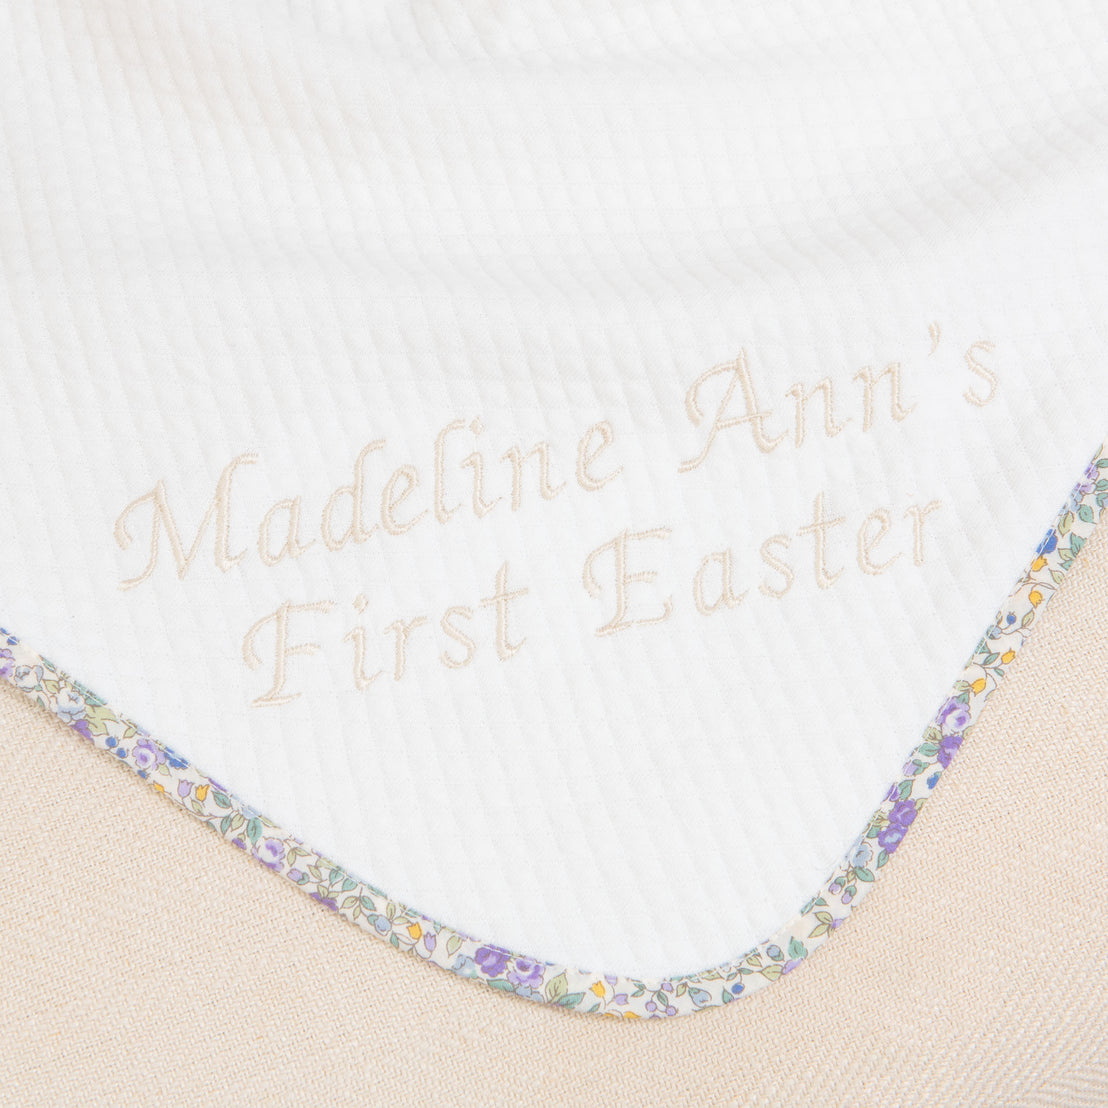 Close-up of a Petite Fleur Gift Set - Save 10% embroidered with the words "Madeline Ann's first Easter" surrounded by a floral border on beige fabric.